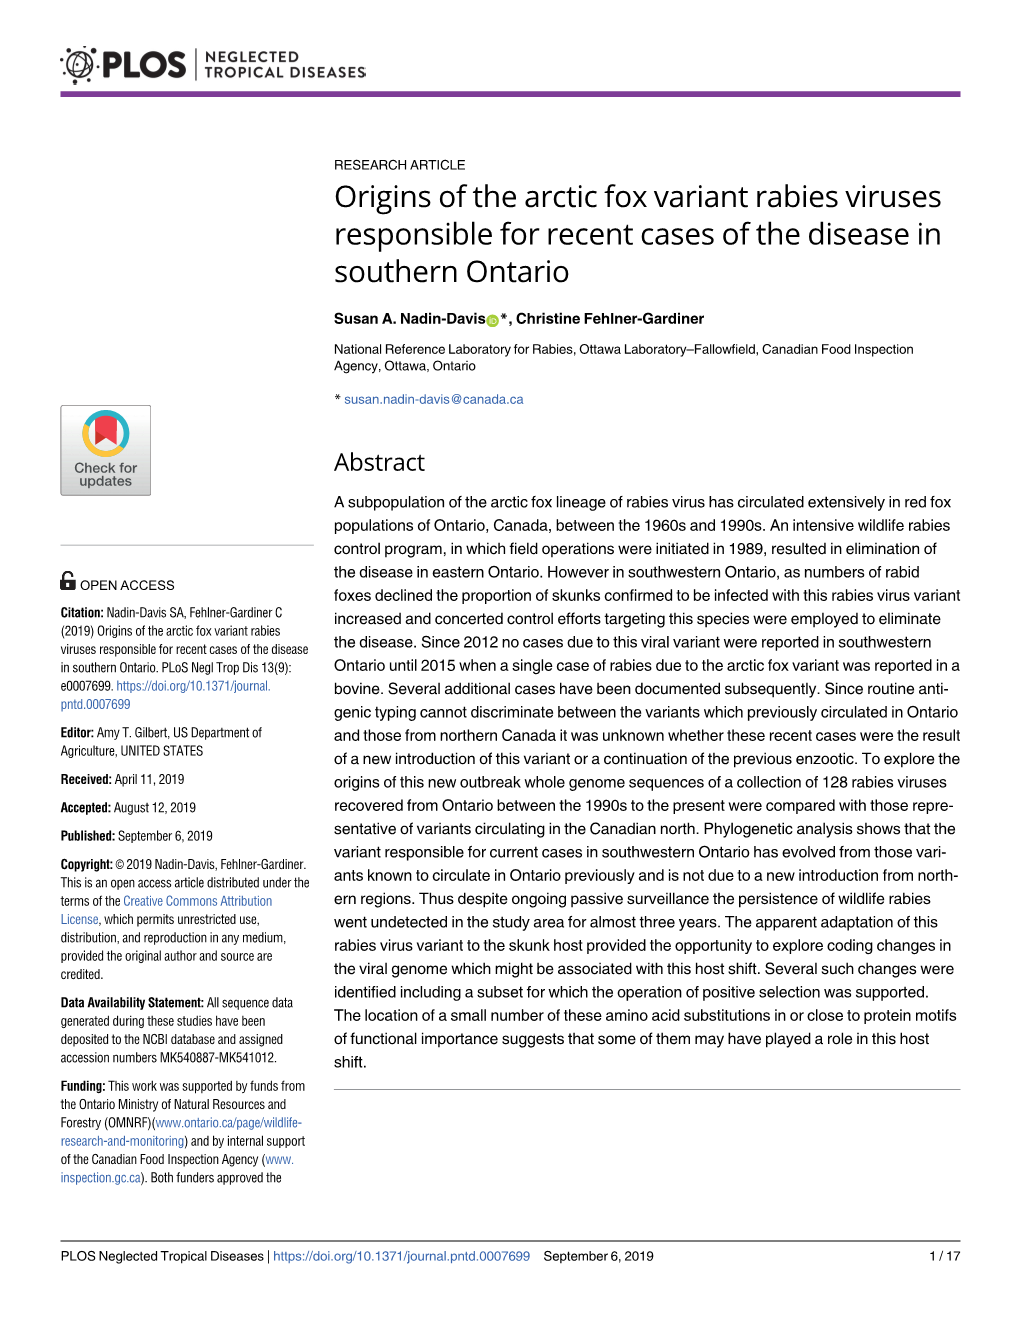 Origins of the Arctic Fox Variant Rabies Viruses Responsible for Recent Cases of the Disease in Southern Ontario